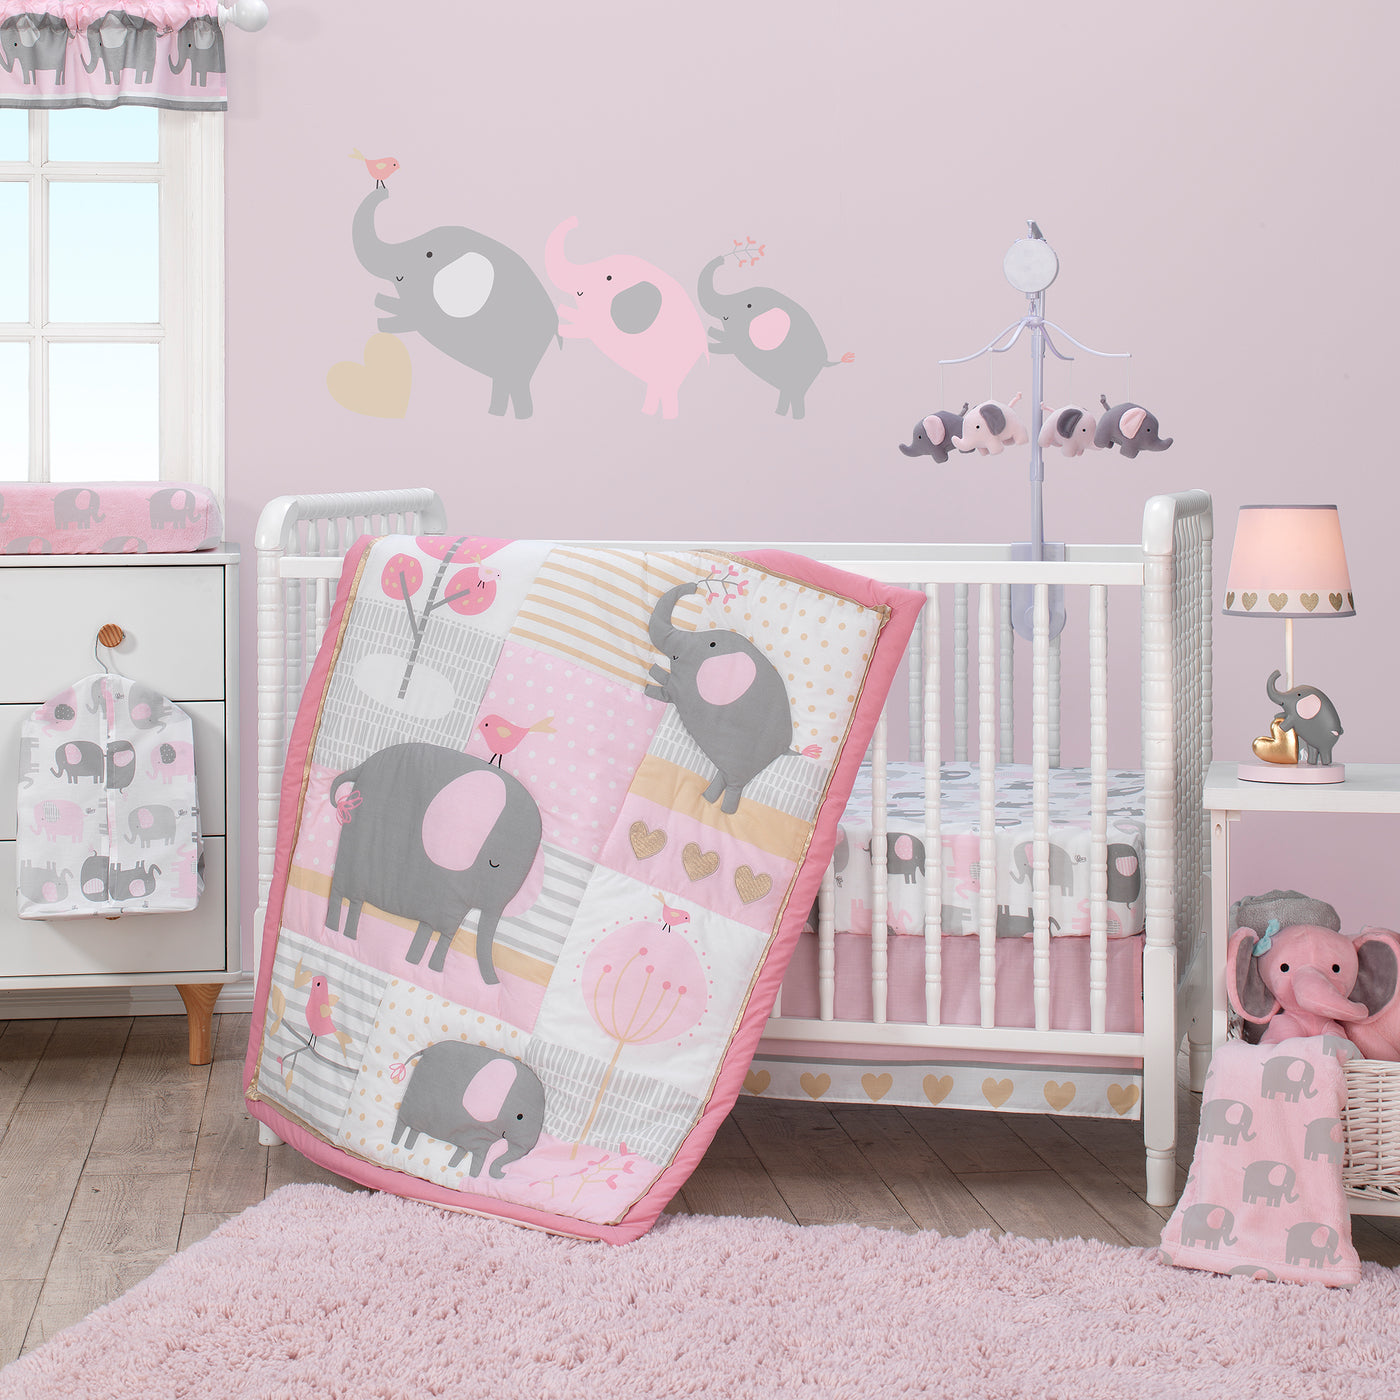 Eloise Wall Decals